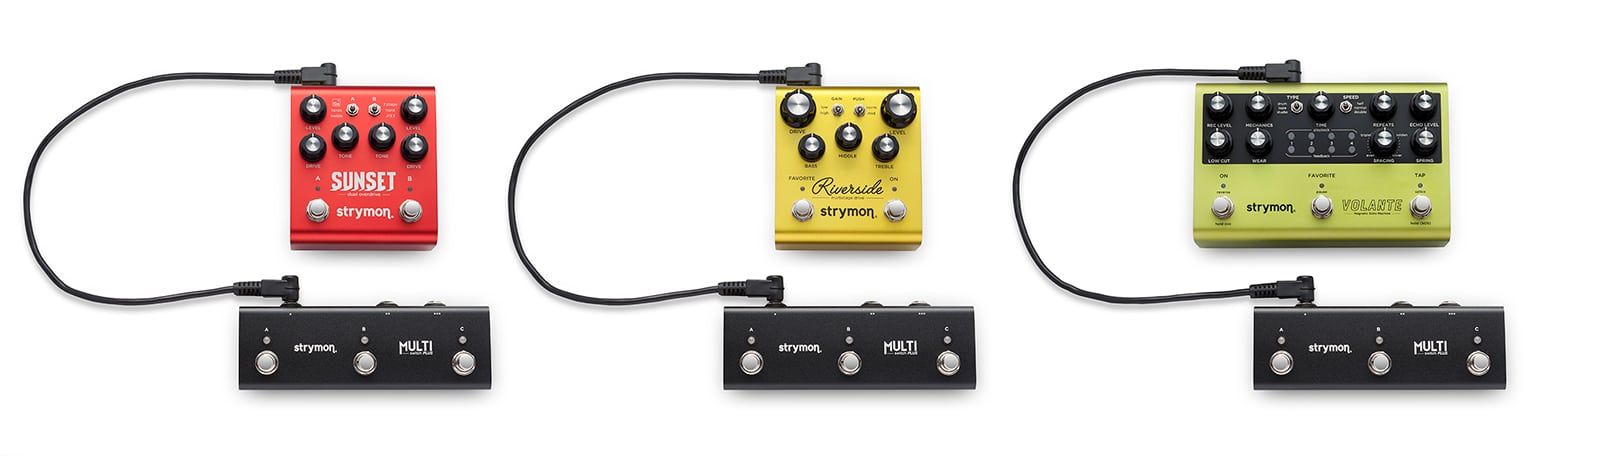 MultiSwitch Plus Extended Control Switch - Strymon